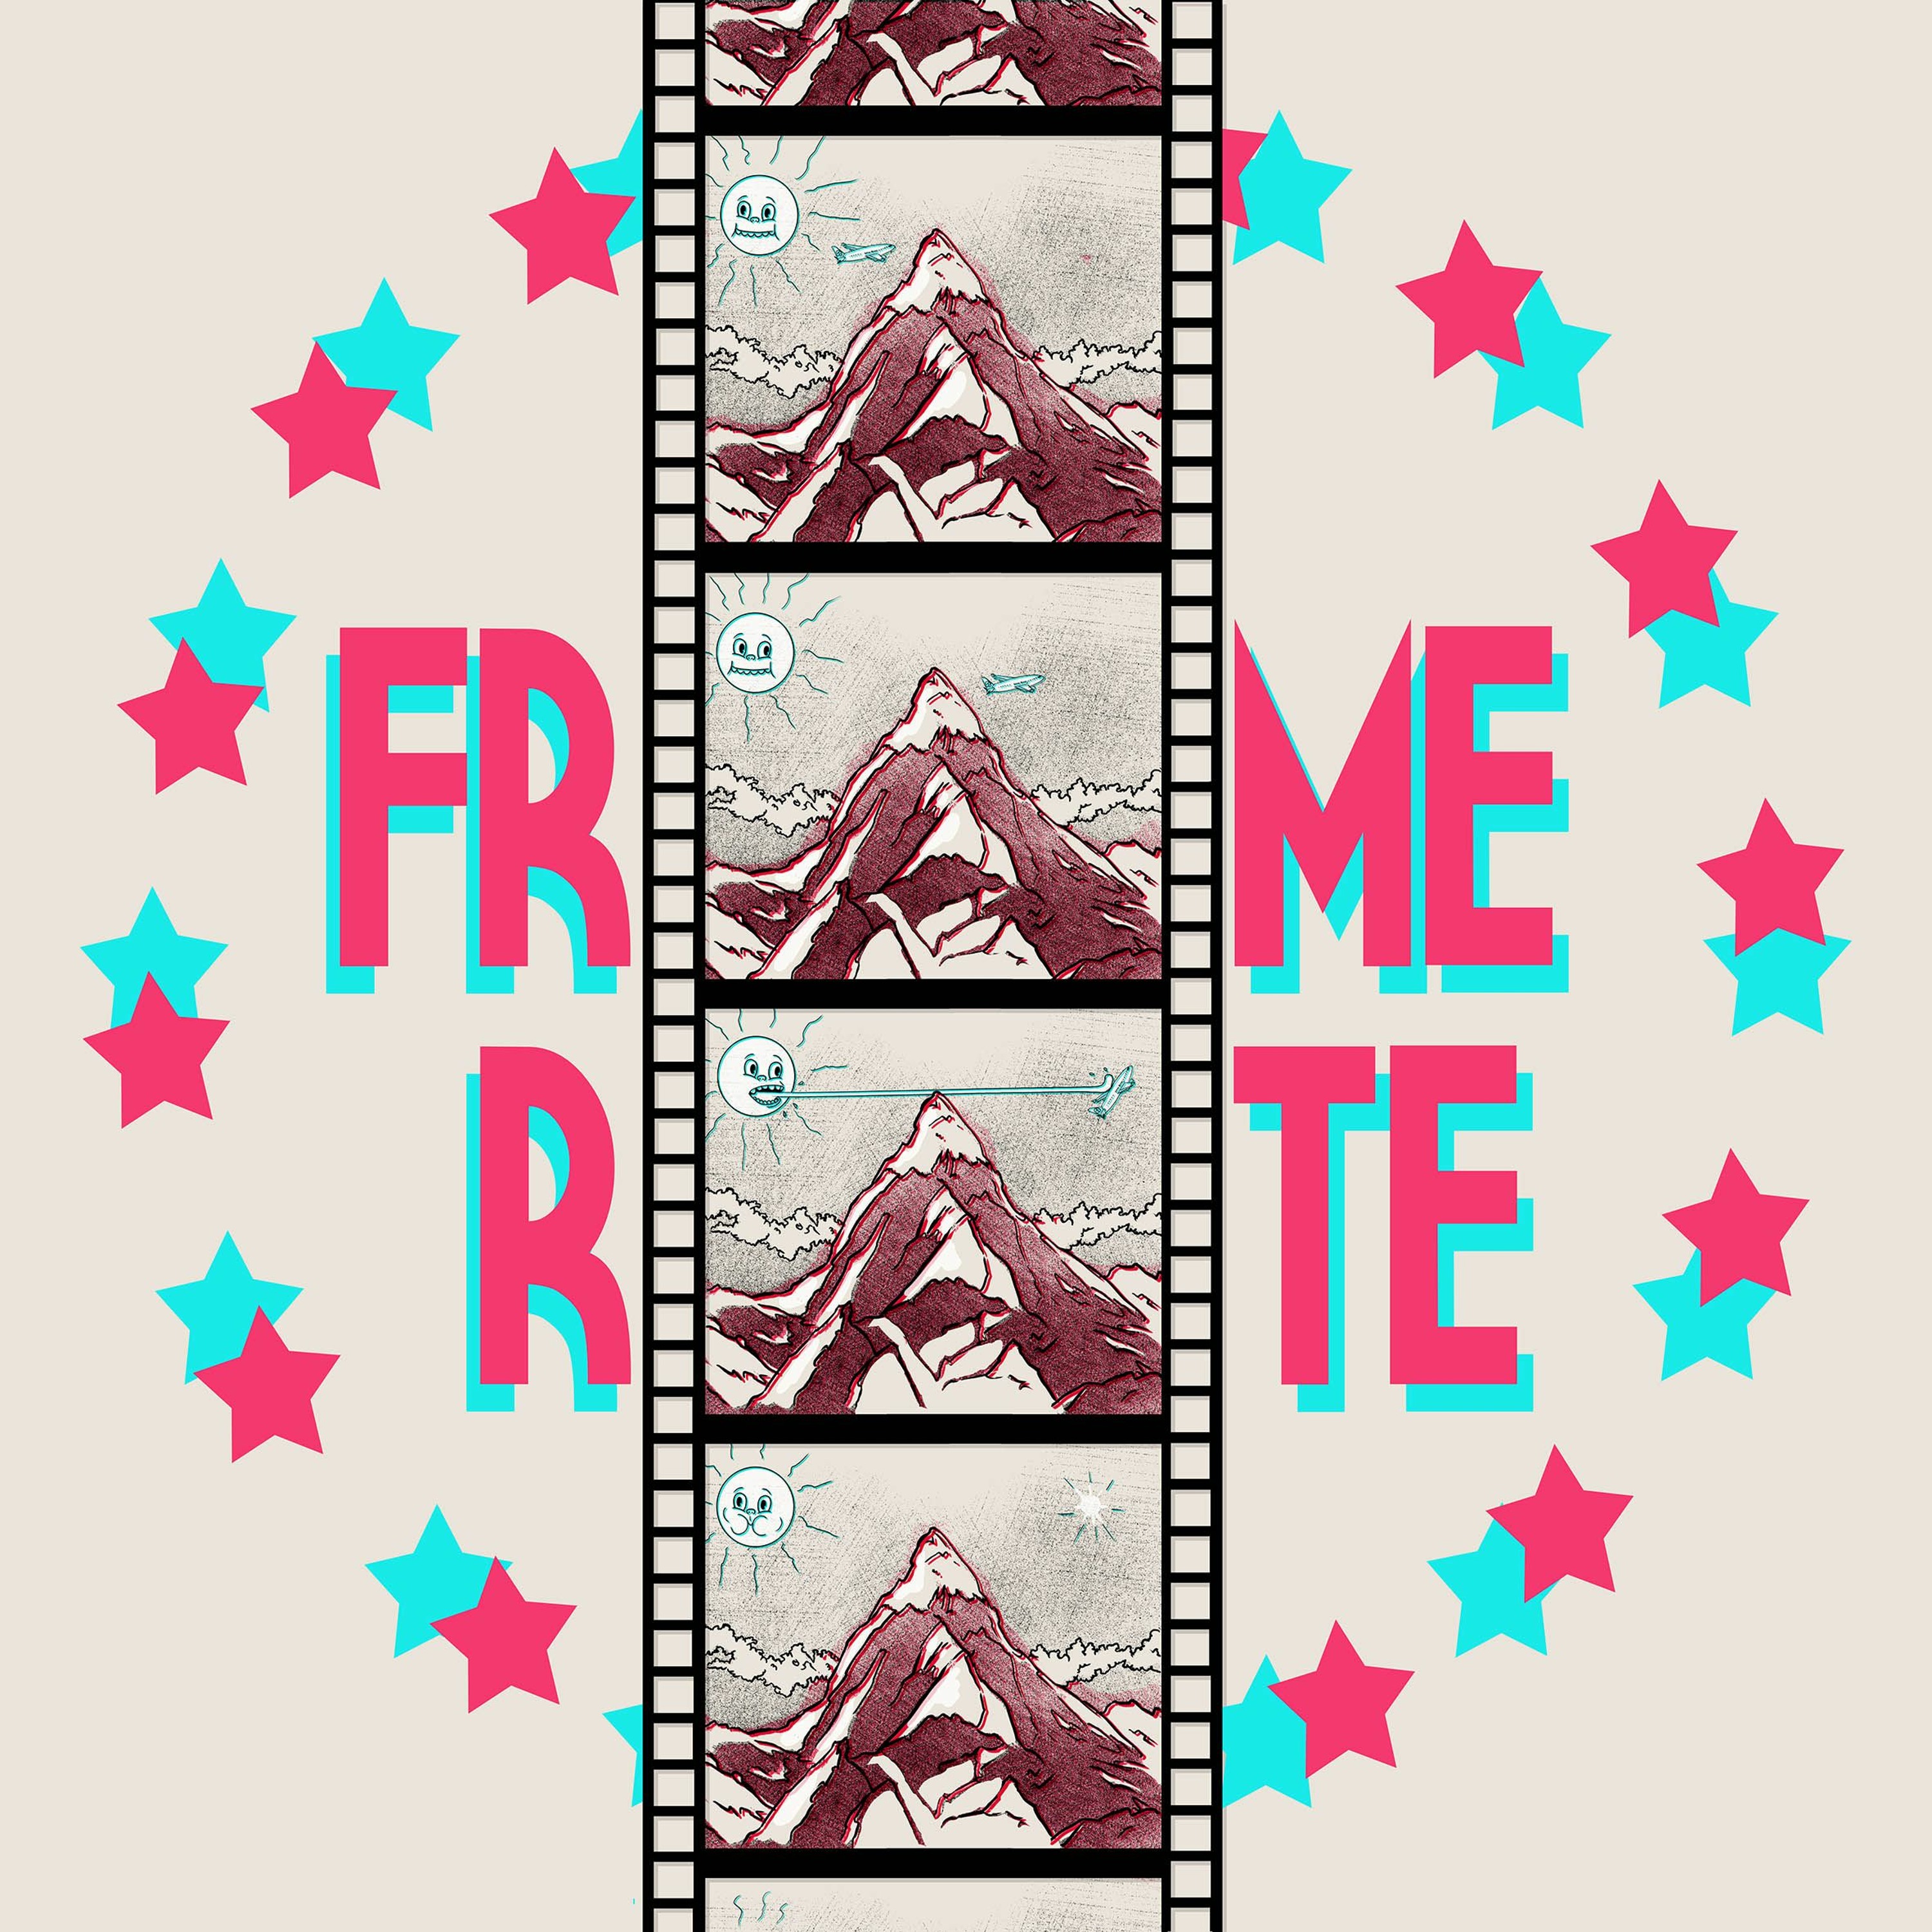 452. Frame Rate: Dave Chappelle’s “The Closer” (Feat. Adam Tod Brown)